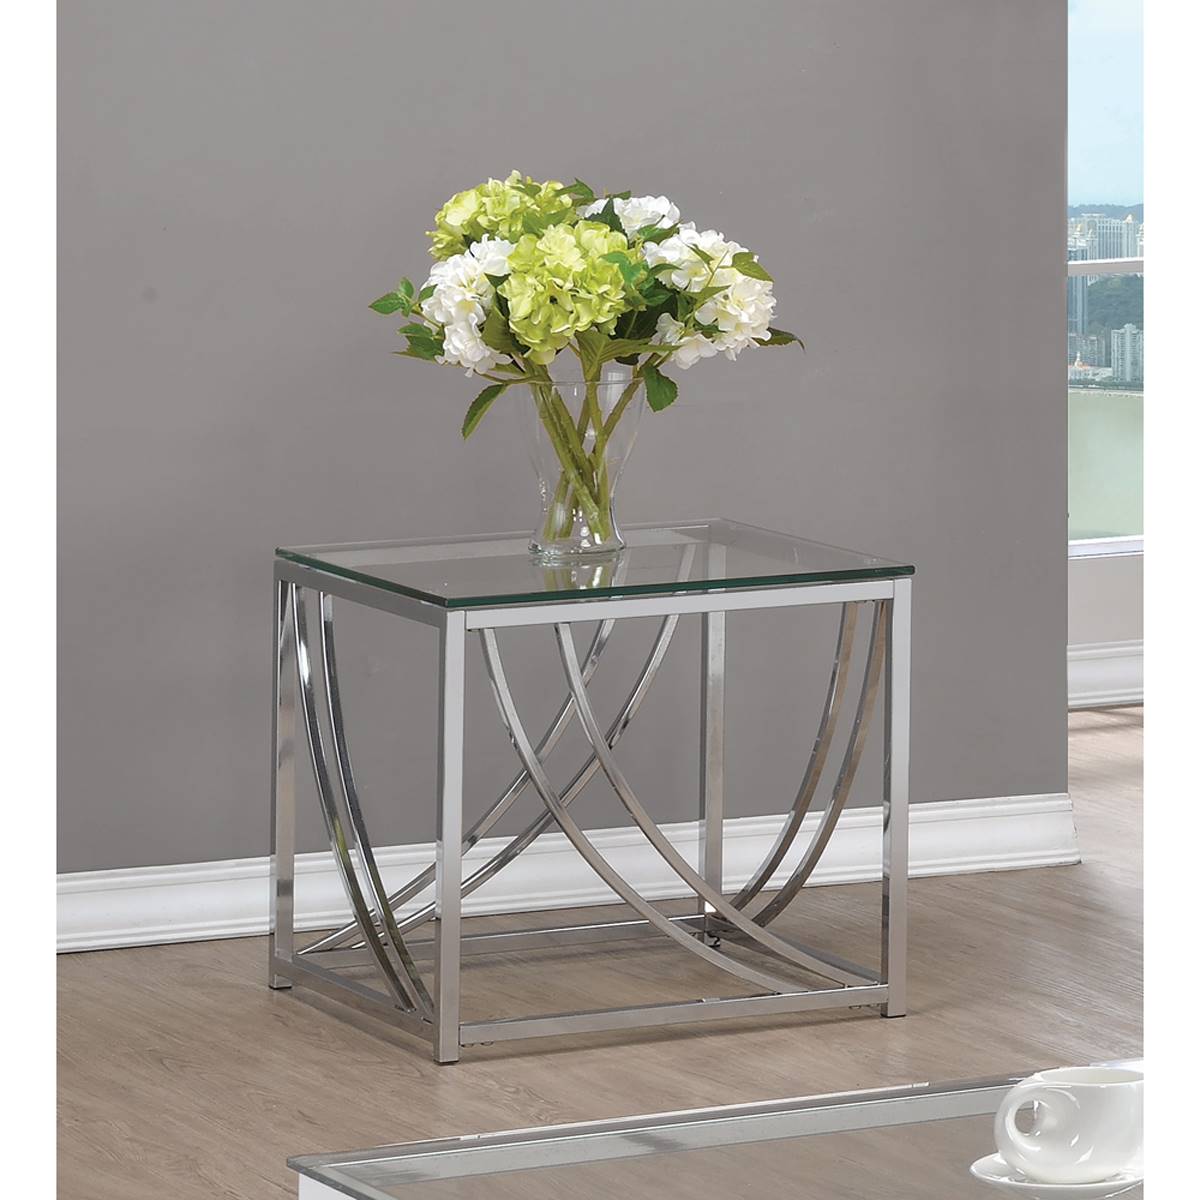 Coaster Glass Top Square End Table Accents - Chrome